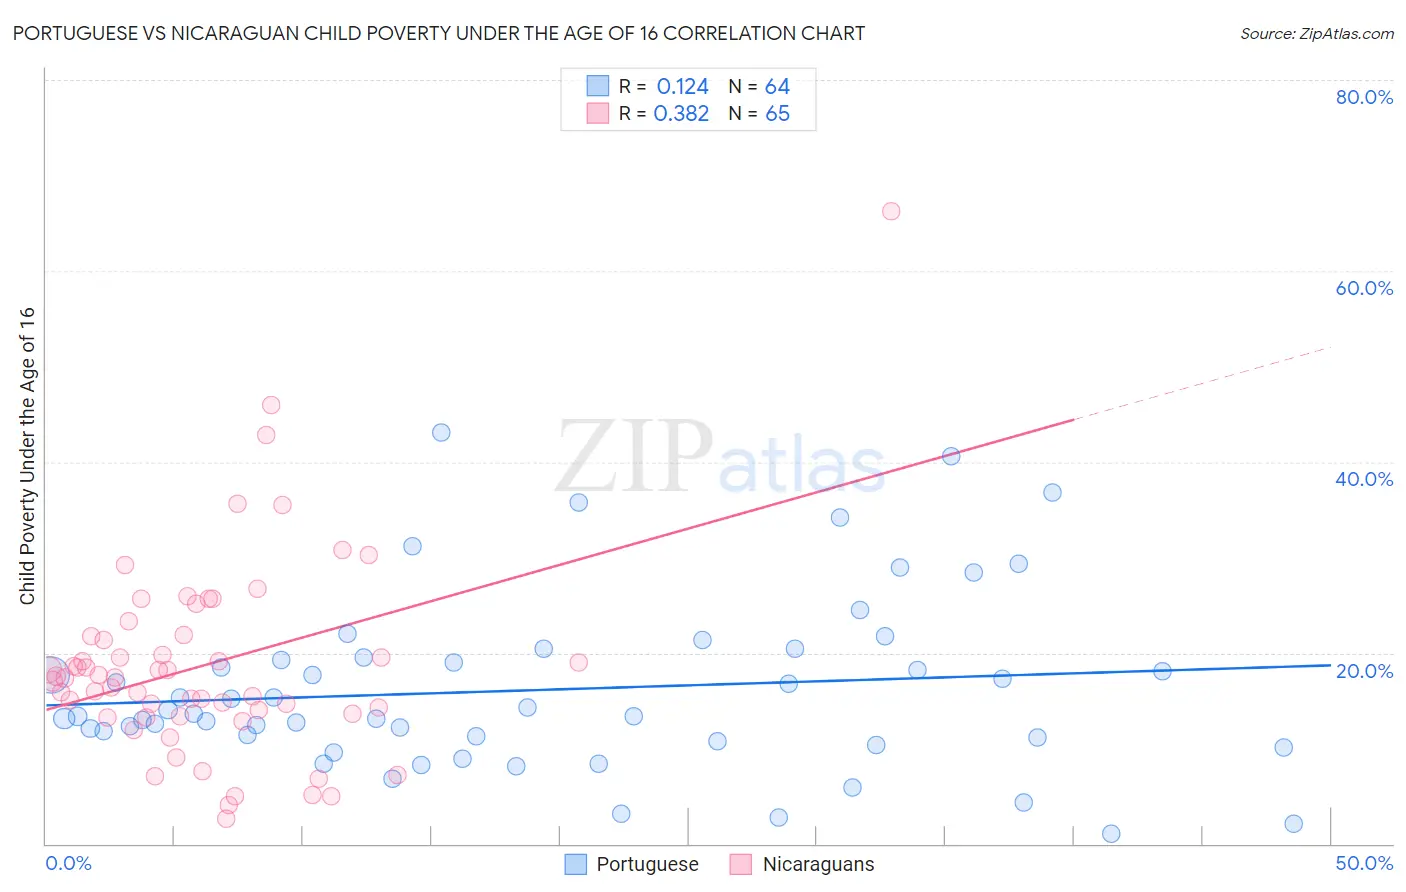 Portuguese vs Nicaraguan Child Poverty Under the Age of 16